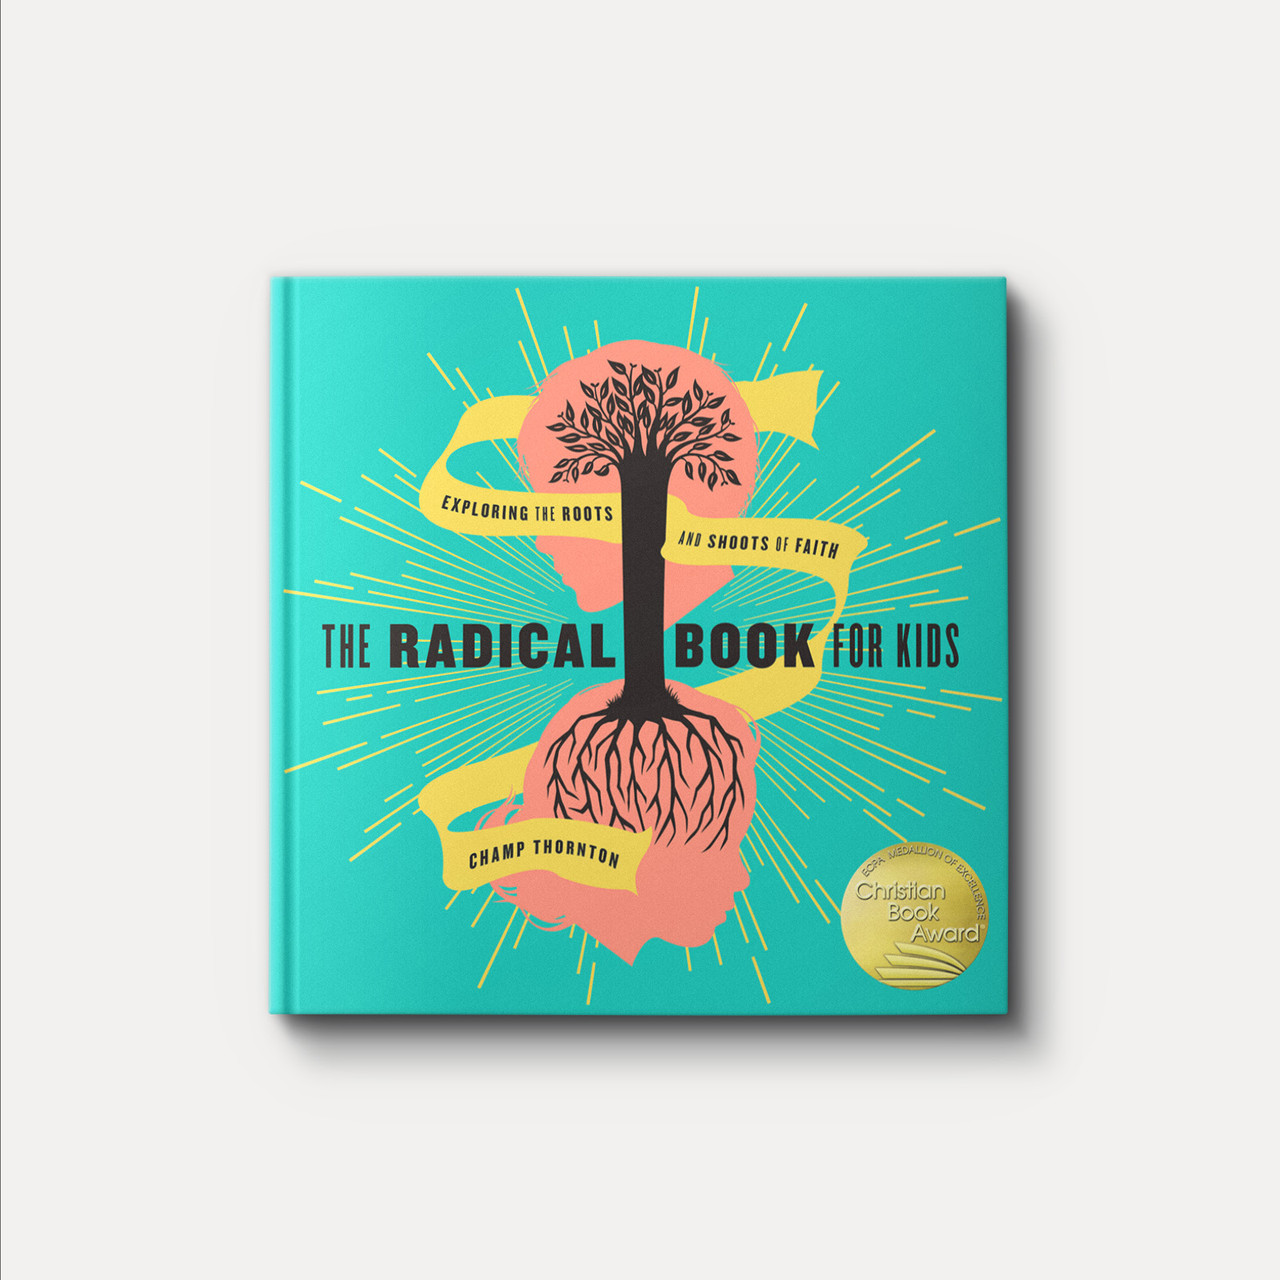 https://cdn11.bigcommerce.com/s-uh4v4/images/stencil/1280x1280/products/1654/16451/Radical-Book-for-Kids_cover__62605.1686760662.jpg?c=2&imbypass=on